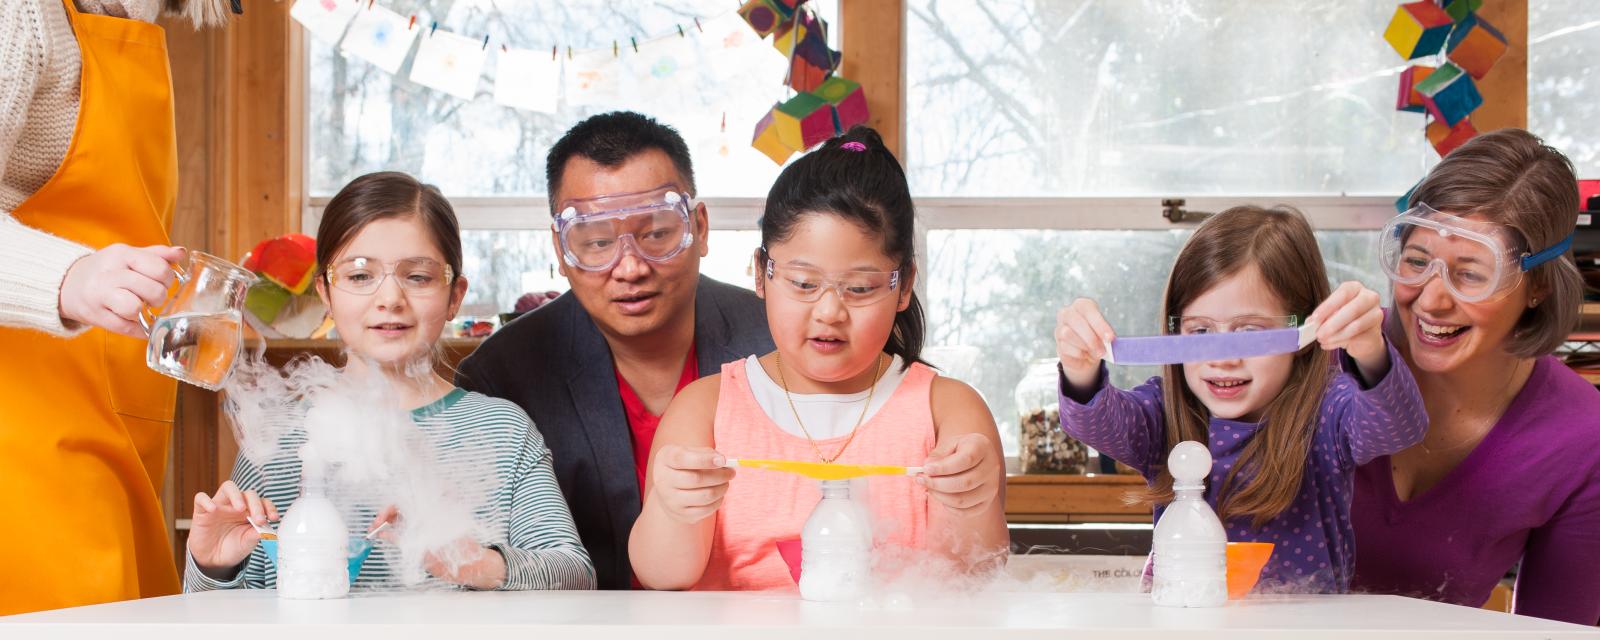 Group of children and adults using dry ice to make bubbles in Explore Science Let's Do Chemistry Sublimation Bubbles activity